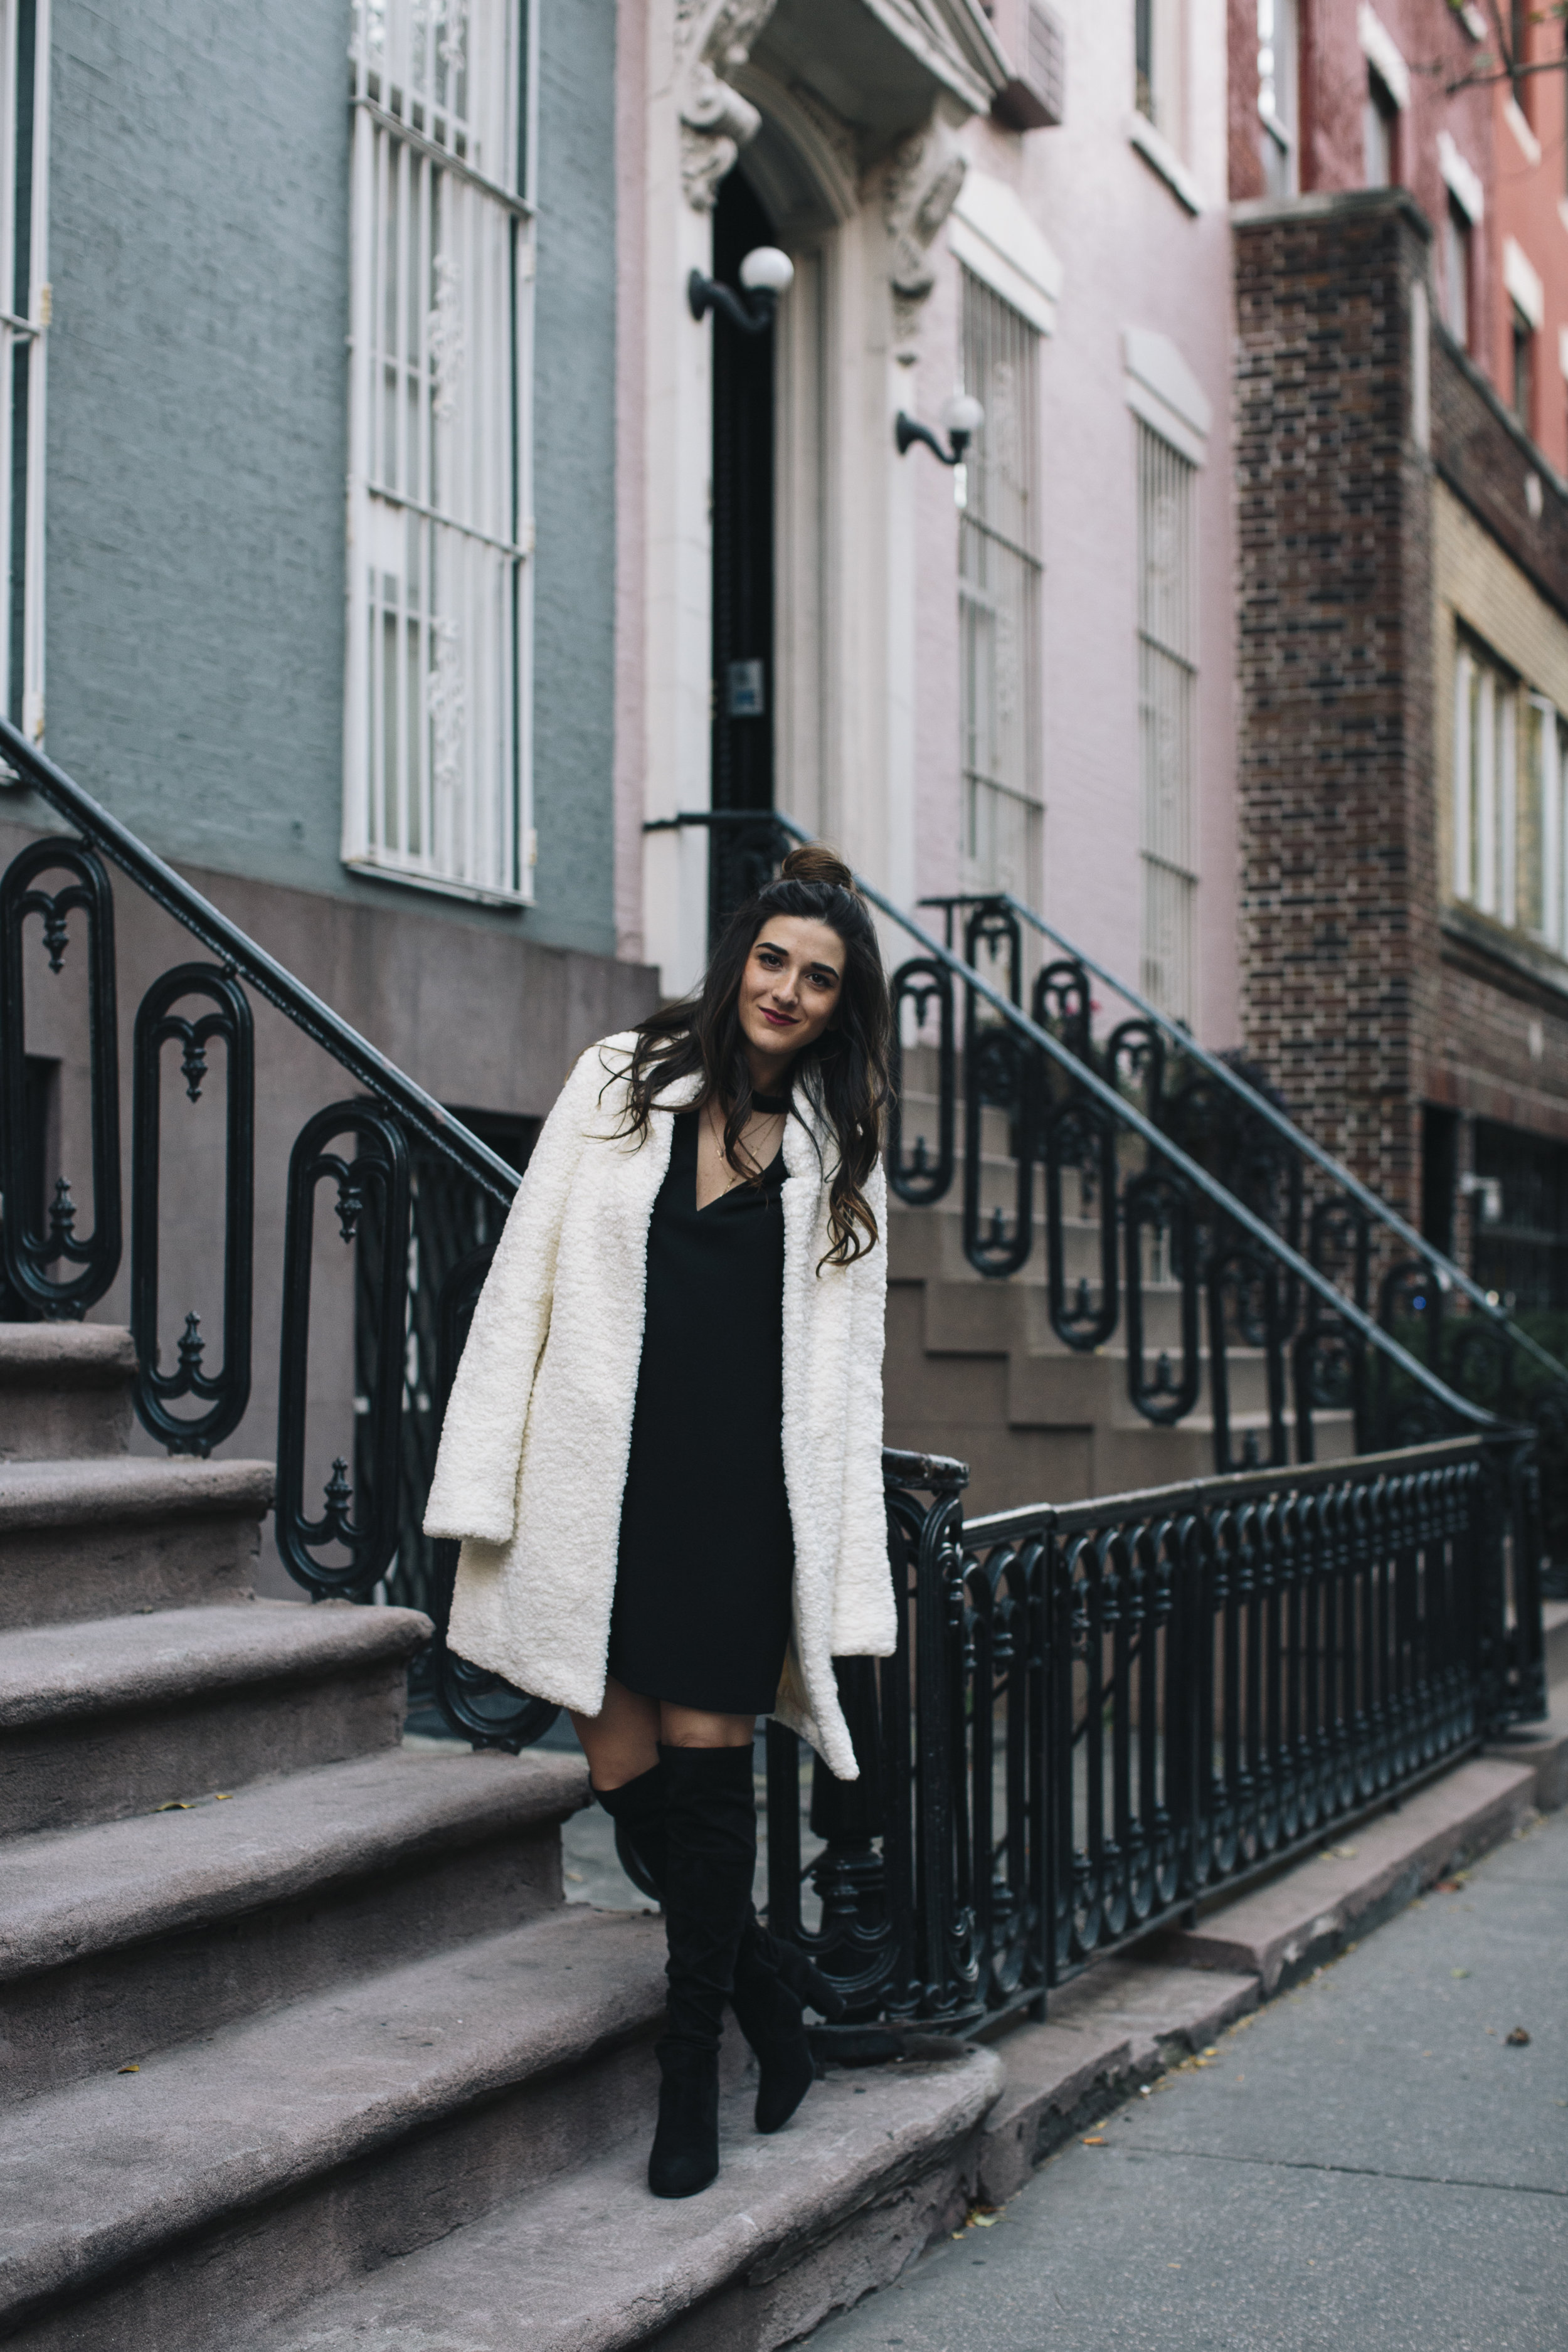 Teddy Bear Coat + OTN Boots How To Avoid Blogger Depression Louboutins & Love Fashion Blog Esther Santer NYC Street Style Blogger Outfit OOTD Trendy Ivanka Trump Nordstrom Bloomingdales Online Shopping Black Dress Zara Shoes Bun Pretty Wear Girl Women.jpg